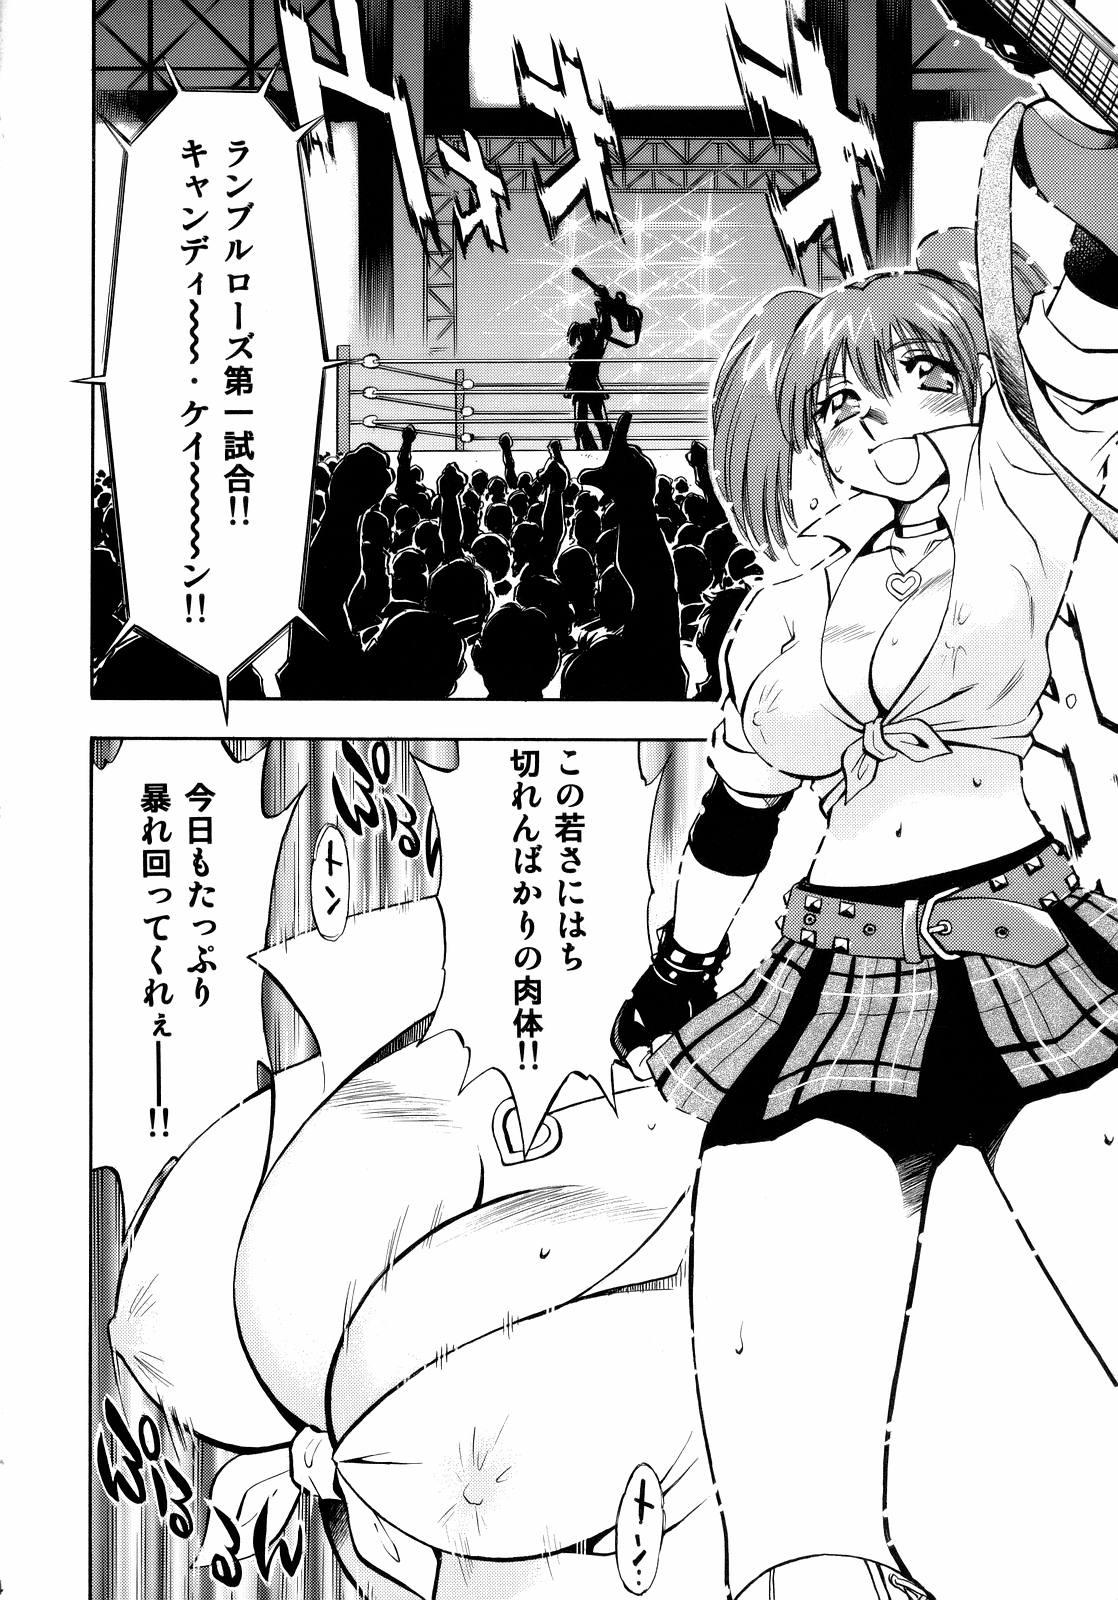 Strange Spencer & Candy no Hatsutaiken - Rumble roses Office Sex - Page 3